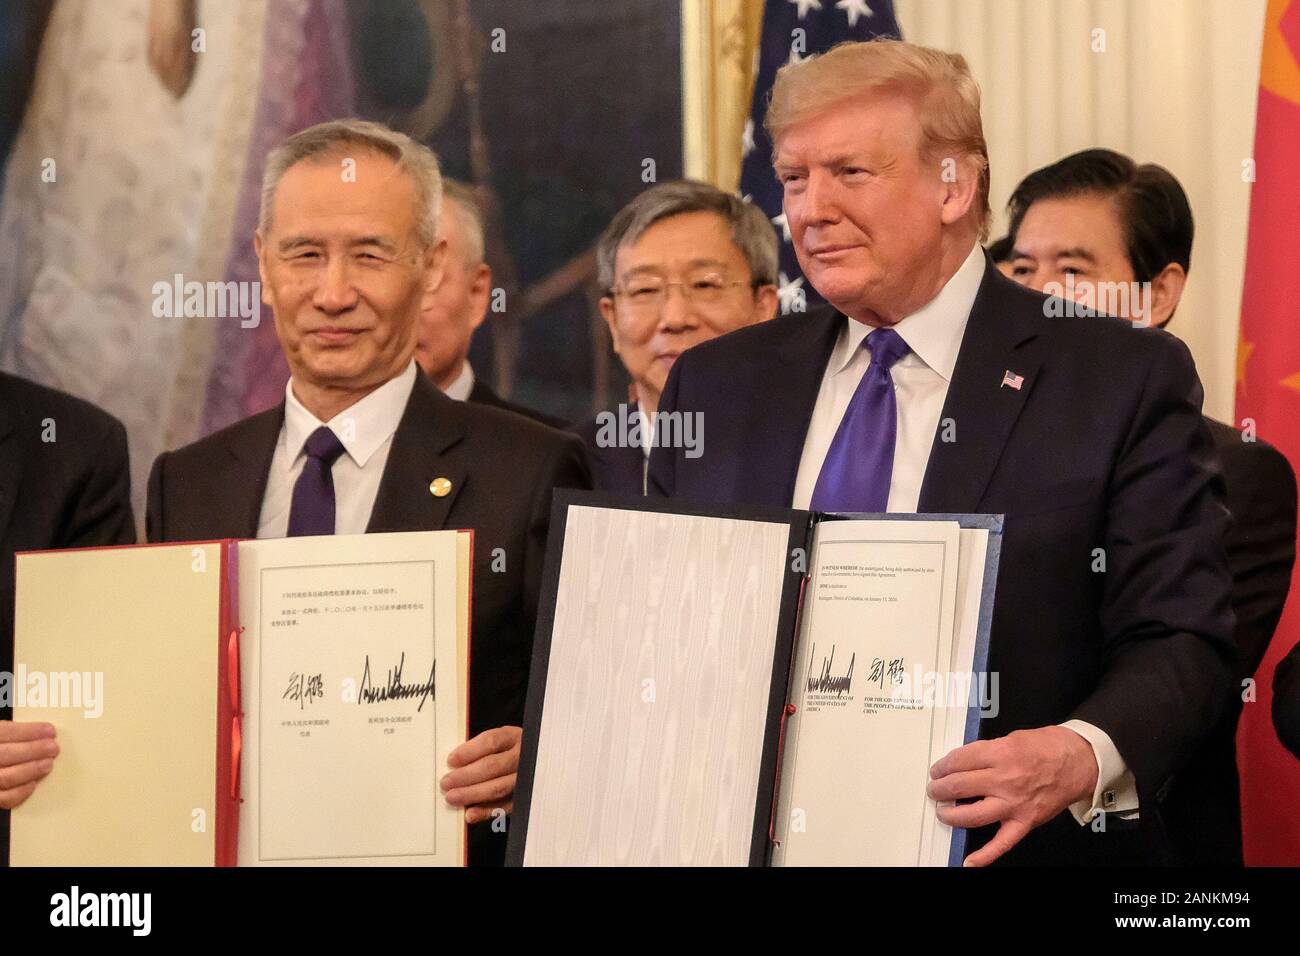 President Donald Trump and Chinese Vice Premier Liu He are applauded after signing the Phase 1 trade deal between the United States and China, during a ceremony in the East Room at the White House on Wednesday, January 15, 2020. The Phase 1 deal will cancel upcoming planned tariffs on Chinese-made products and reduces others while Chine has agreed to increase purchases of U.S. farm products and other goods. Credit: Alex Wroblewski/Pool via CNP /MediaPunch Stock Photo